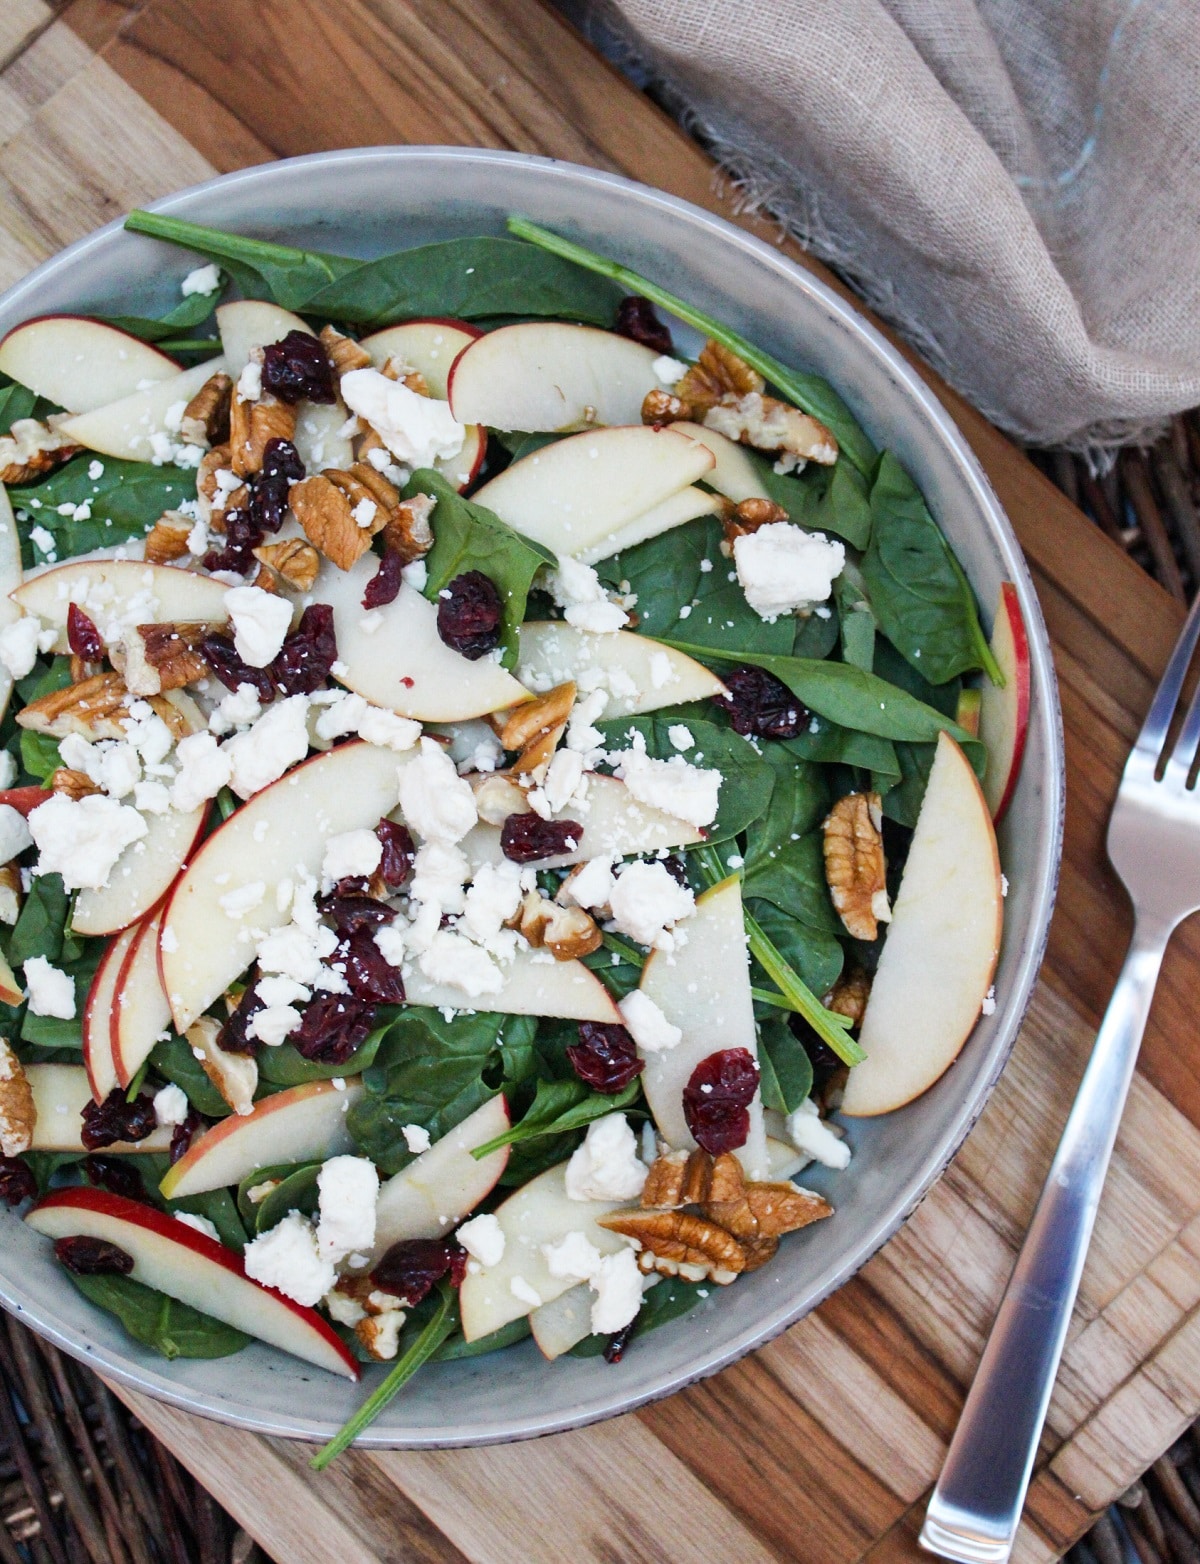 spinach in a gray bowl topped with sliced apples, pecans, crumbled feta cheese, and dried cranberries.